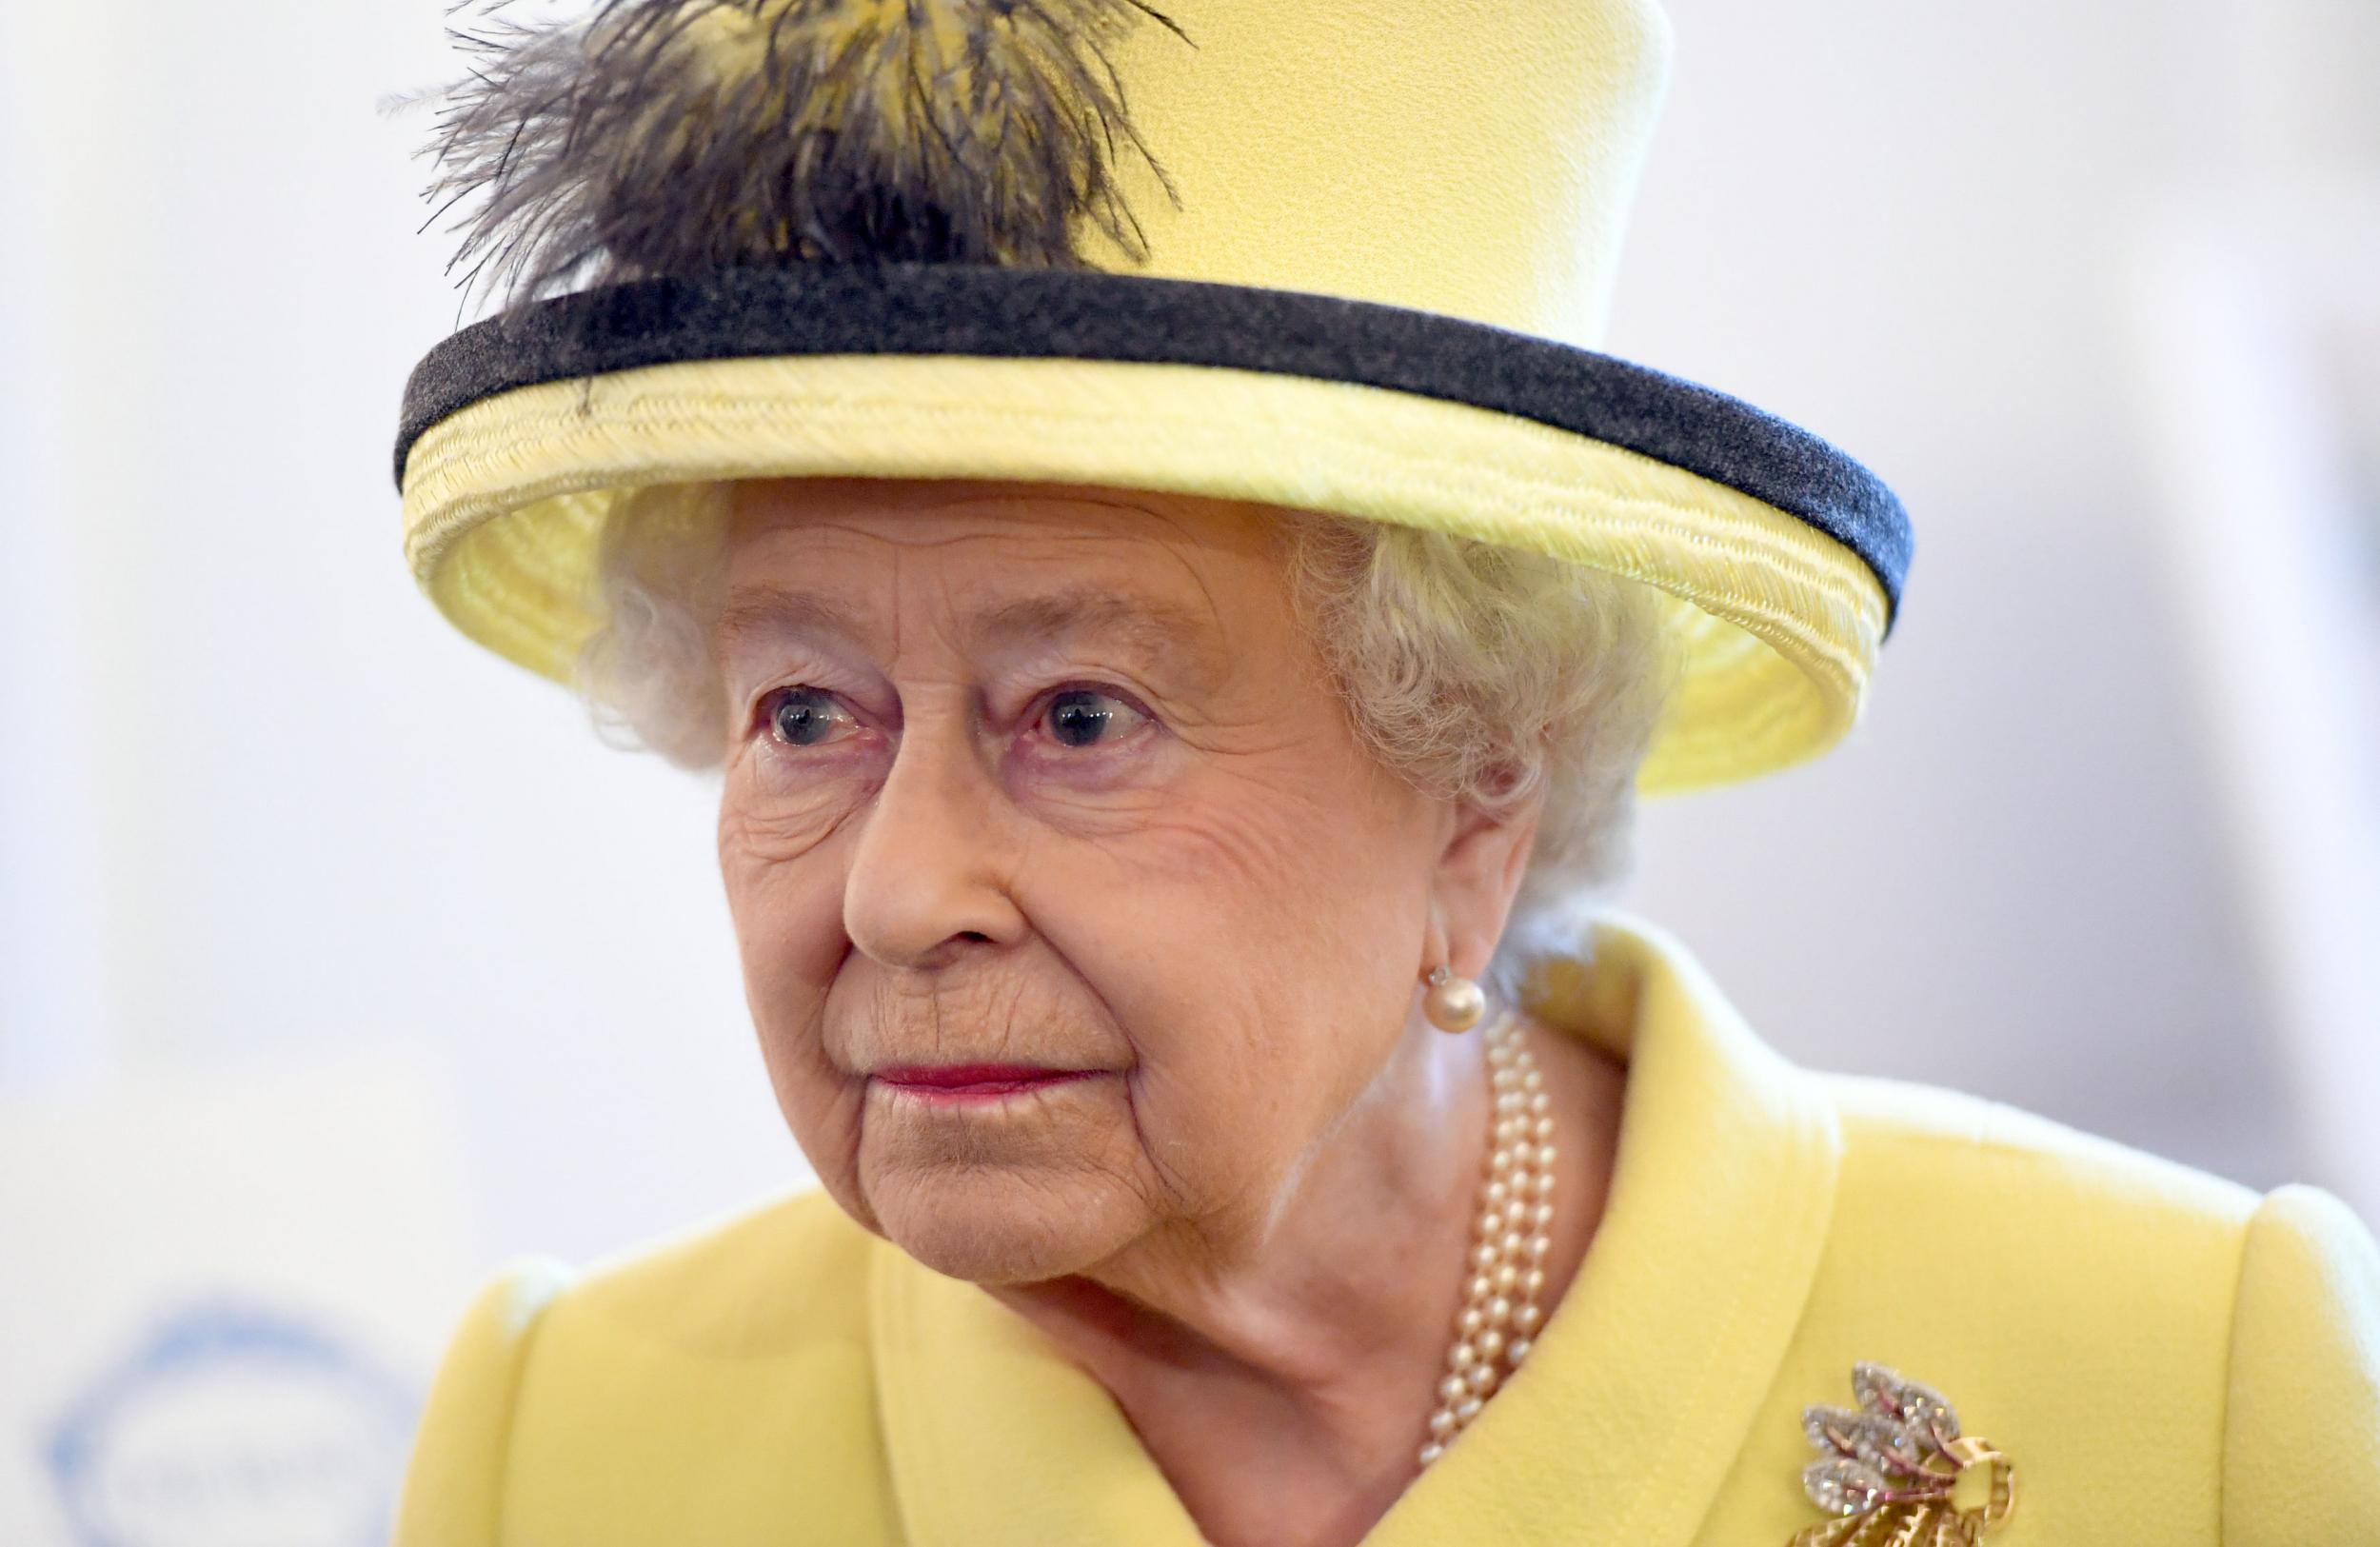 The Queen may not be able to attend the annual New Year's Day church service, Buckingham Palace has indicated